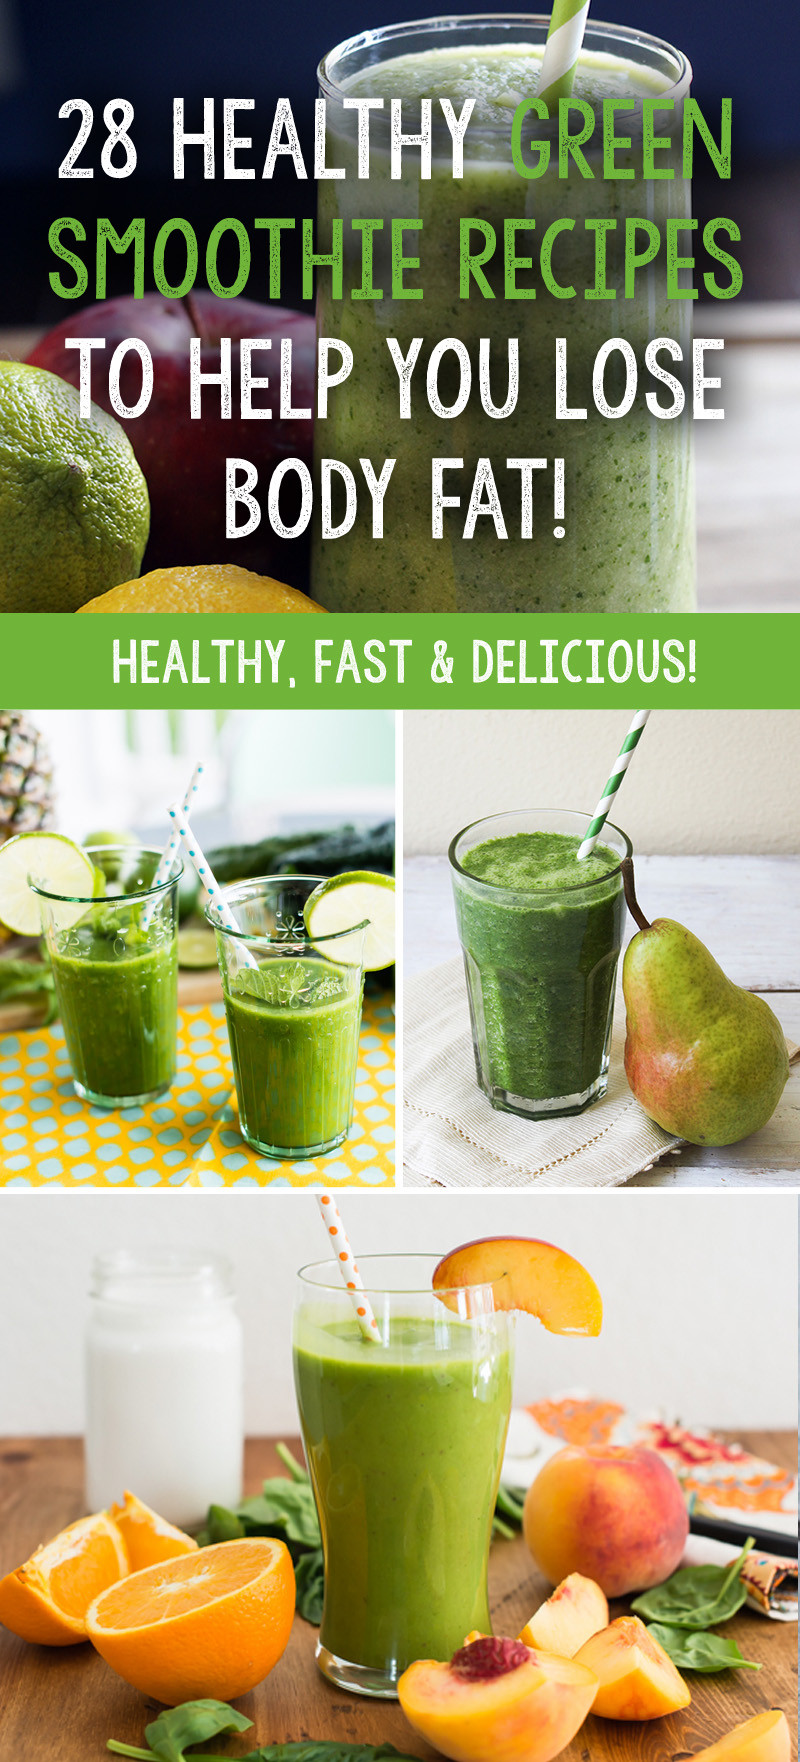 Healthy Green Smoothies
 28 Healthy Green Smoothie Recipes To Help You Lose Body Fat